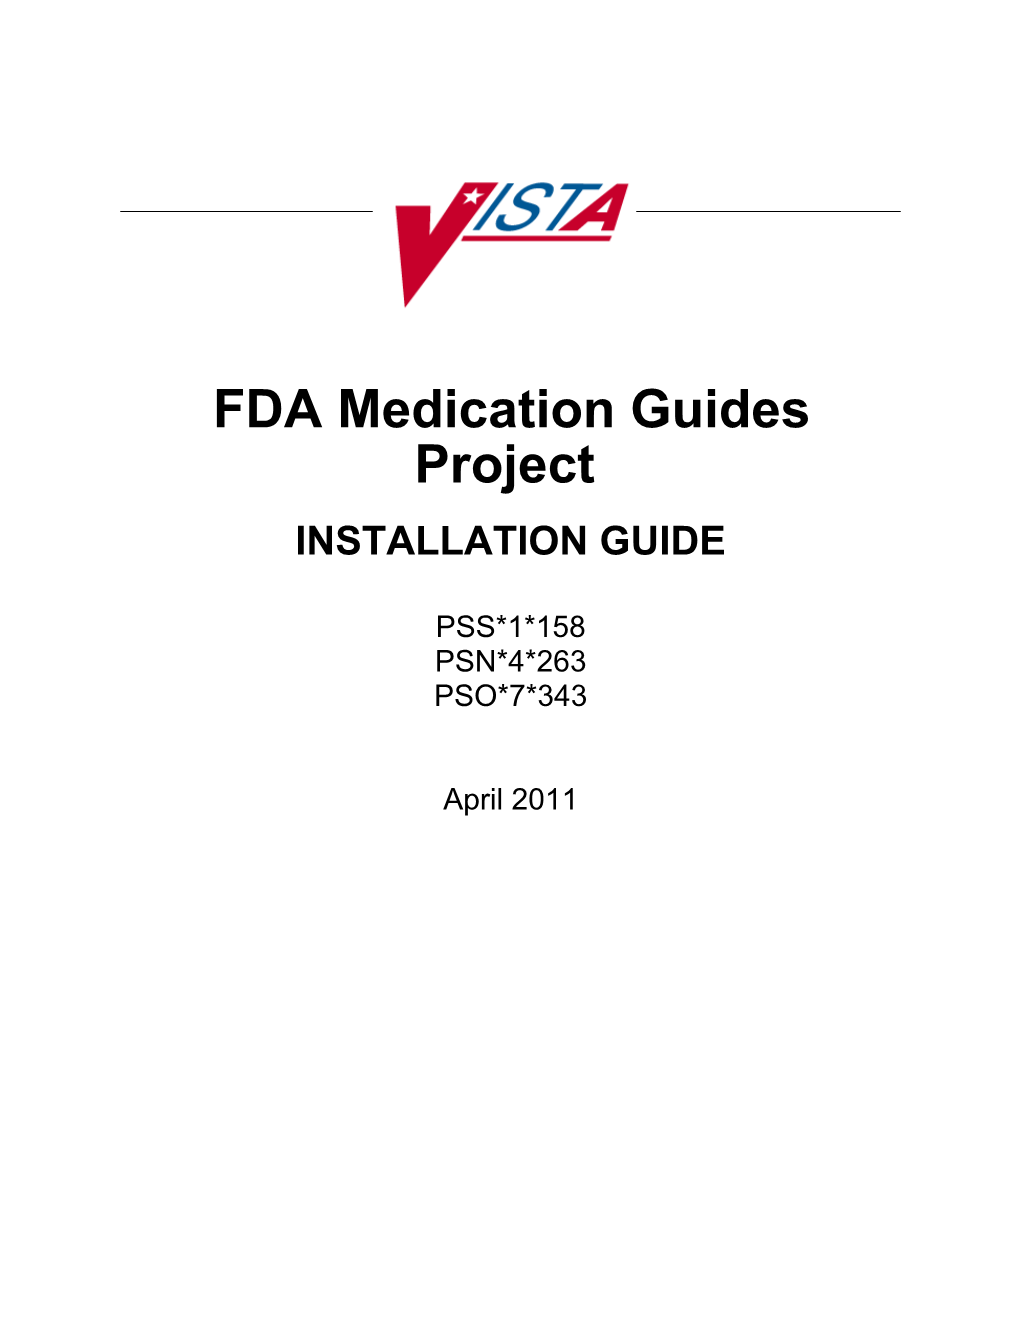 FDA Medication Guides Project